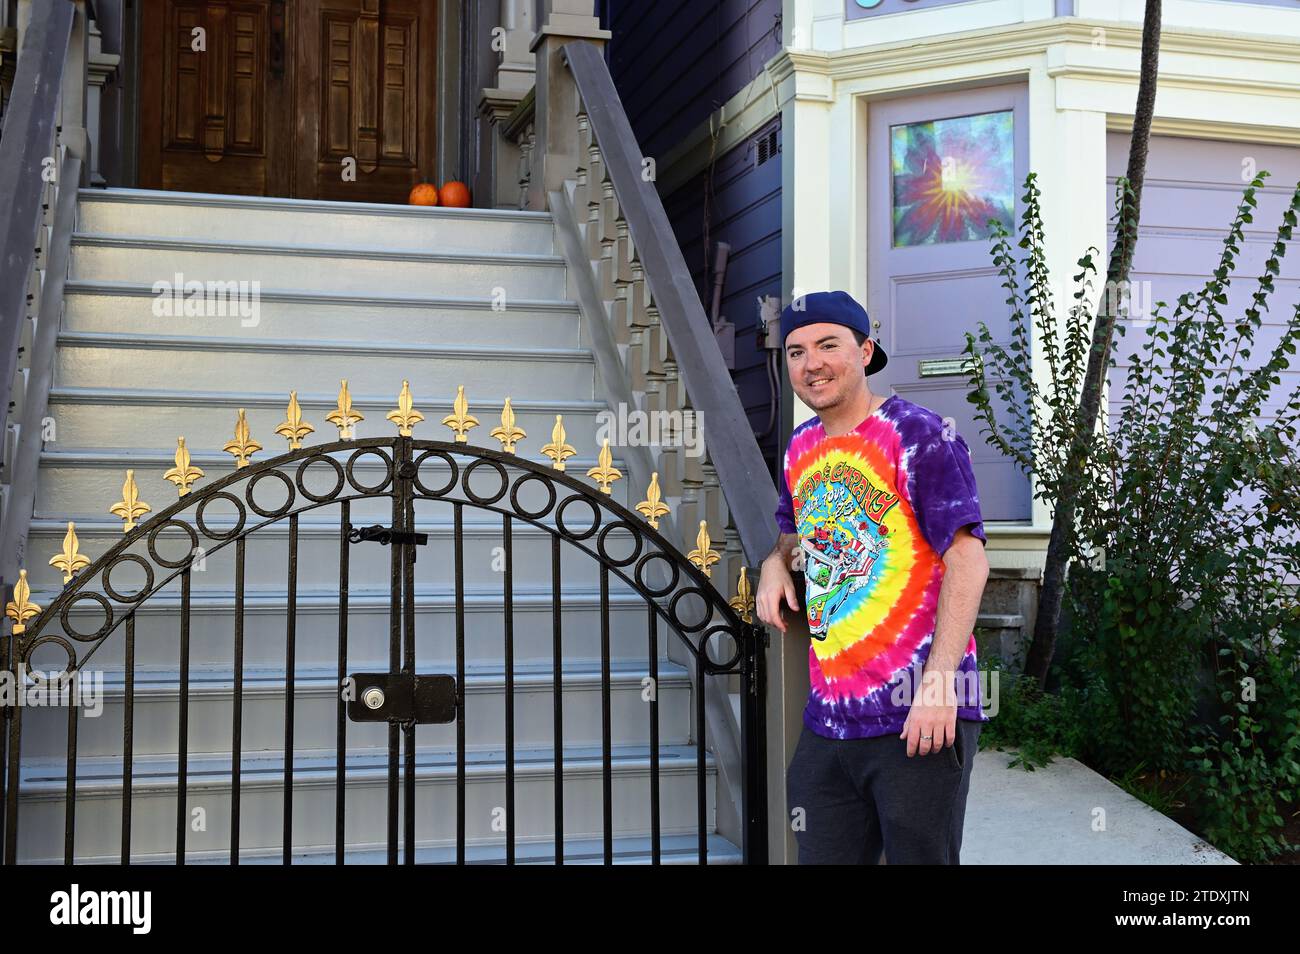 San Francisco, California, USA. Man, appropriately attired, visiting the 'Grateful Dead House' at 710 Ashbury Street. Stock Photo